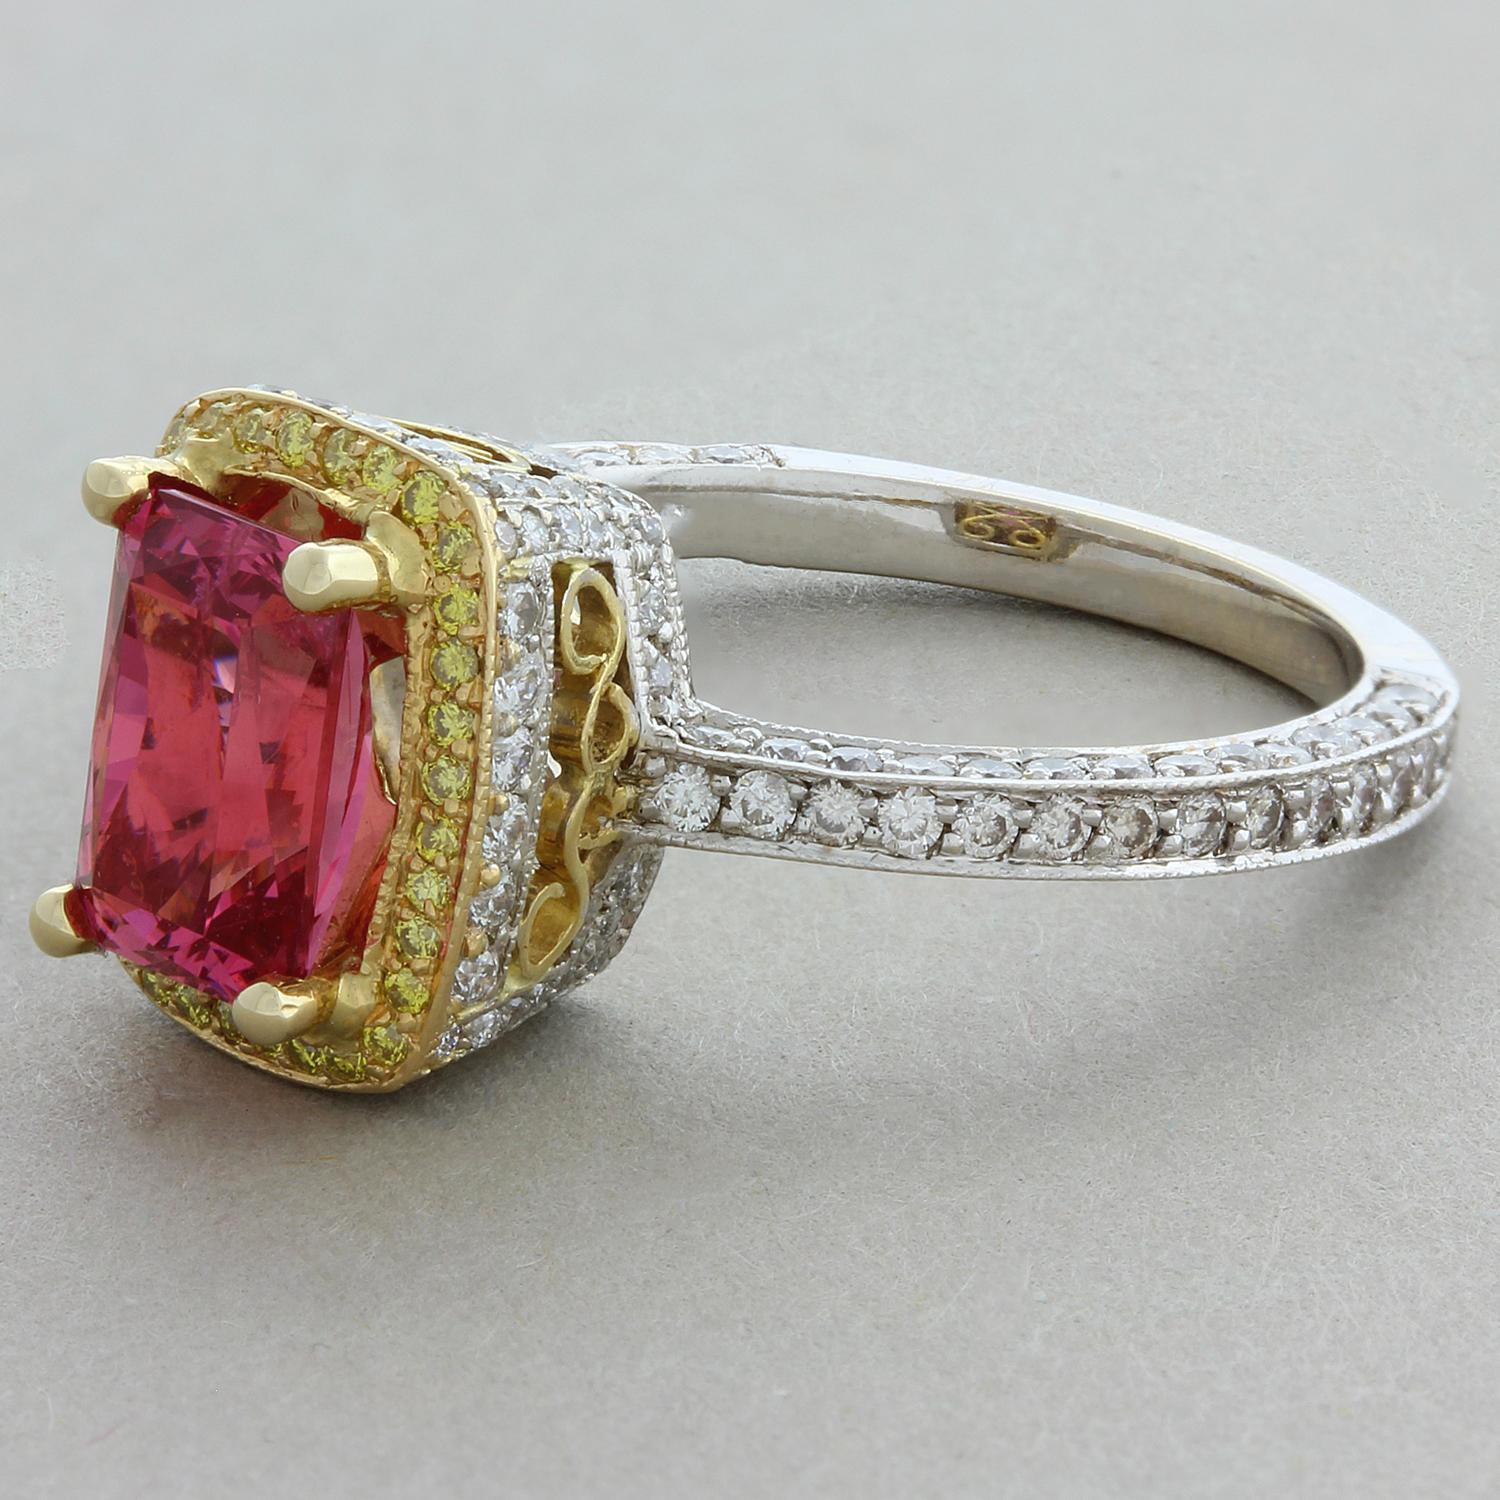 An alluring pink spinel weighing 1.70 carats haloed by the warm hue of 0.78 carats of yellow diamonds with white diamonds along the shank of the ring. The radiant cut spinel and the round cut yellow diamonds are set in 18K yellow gold to accentuate